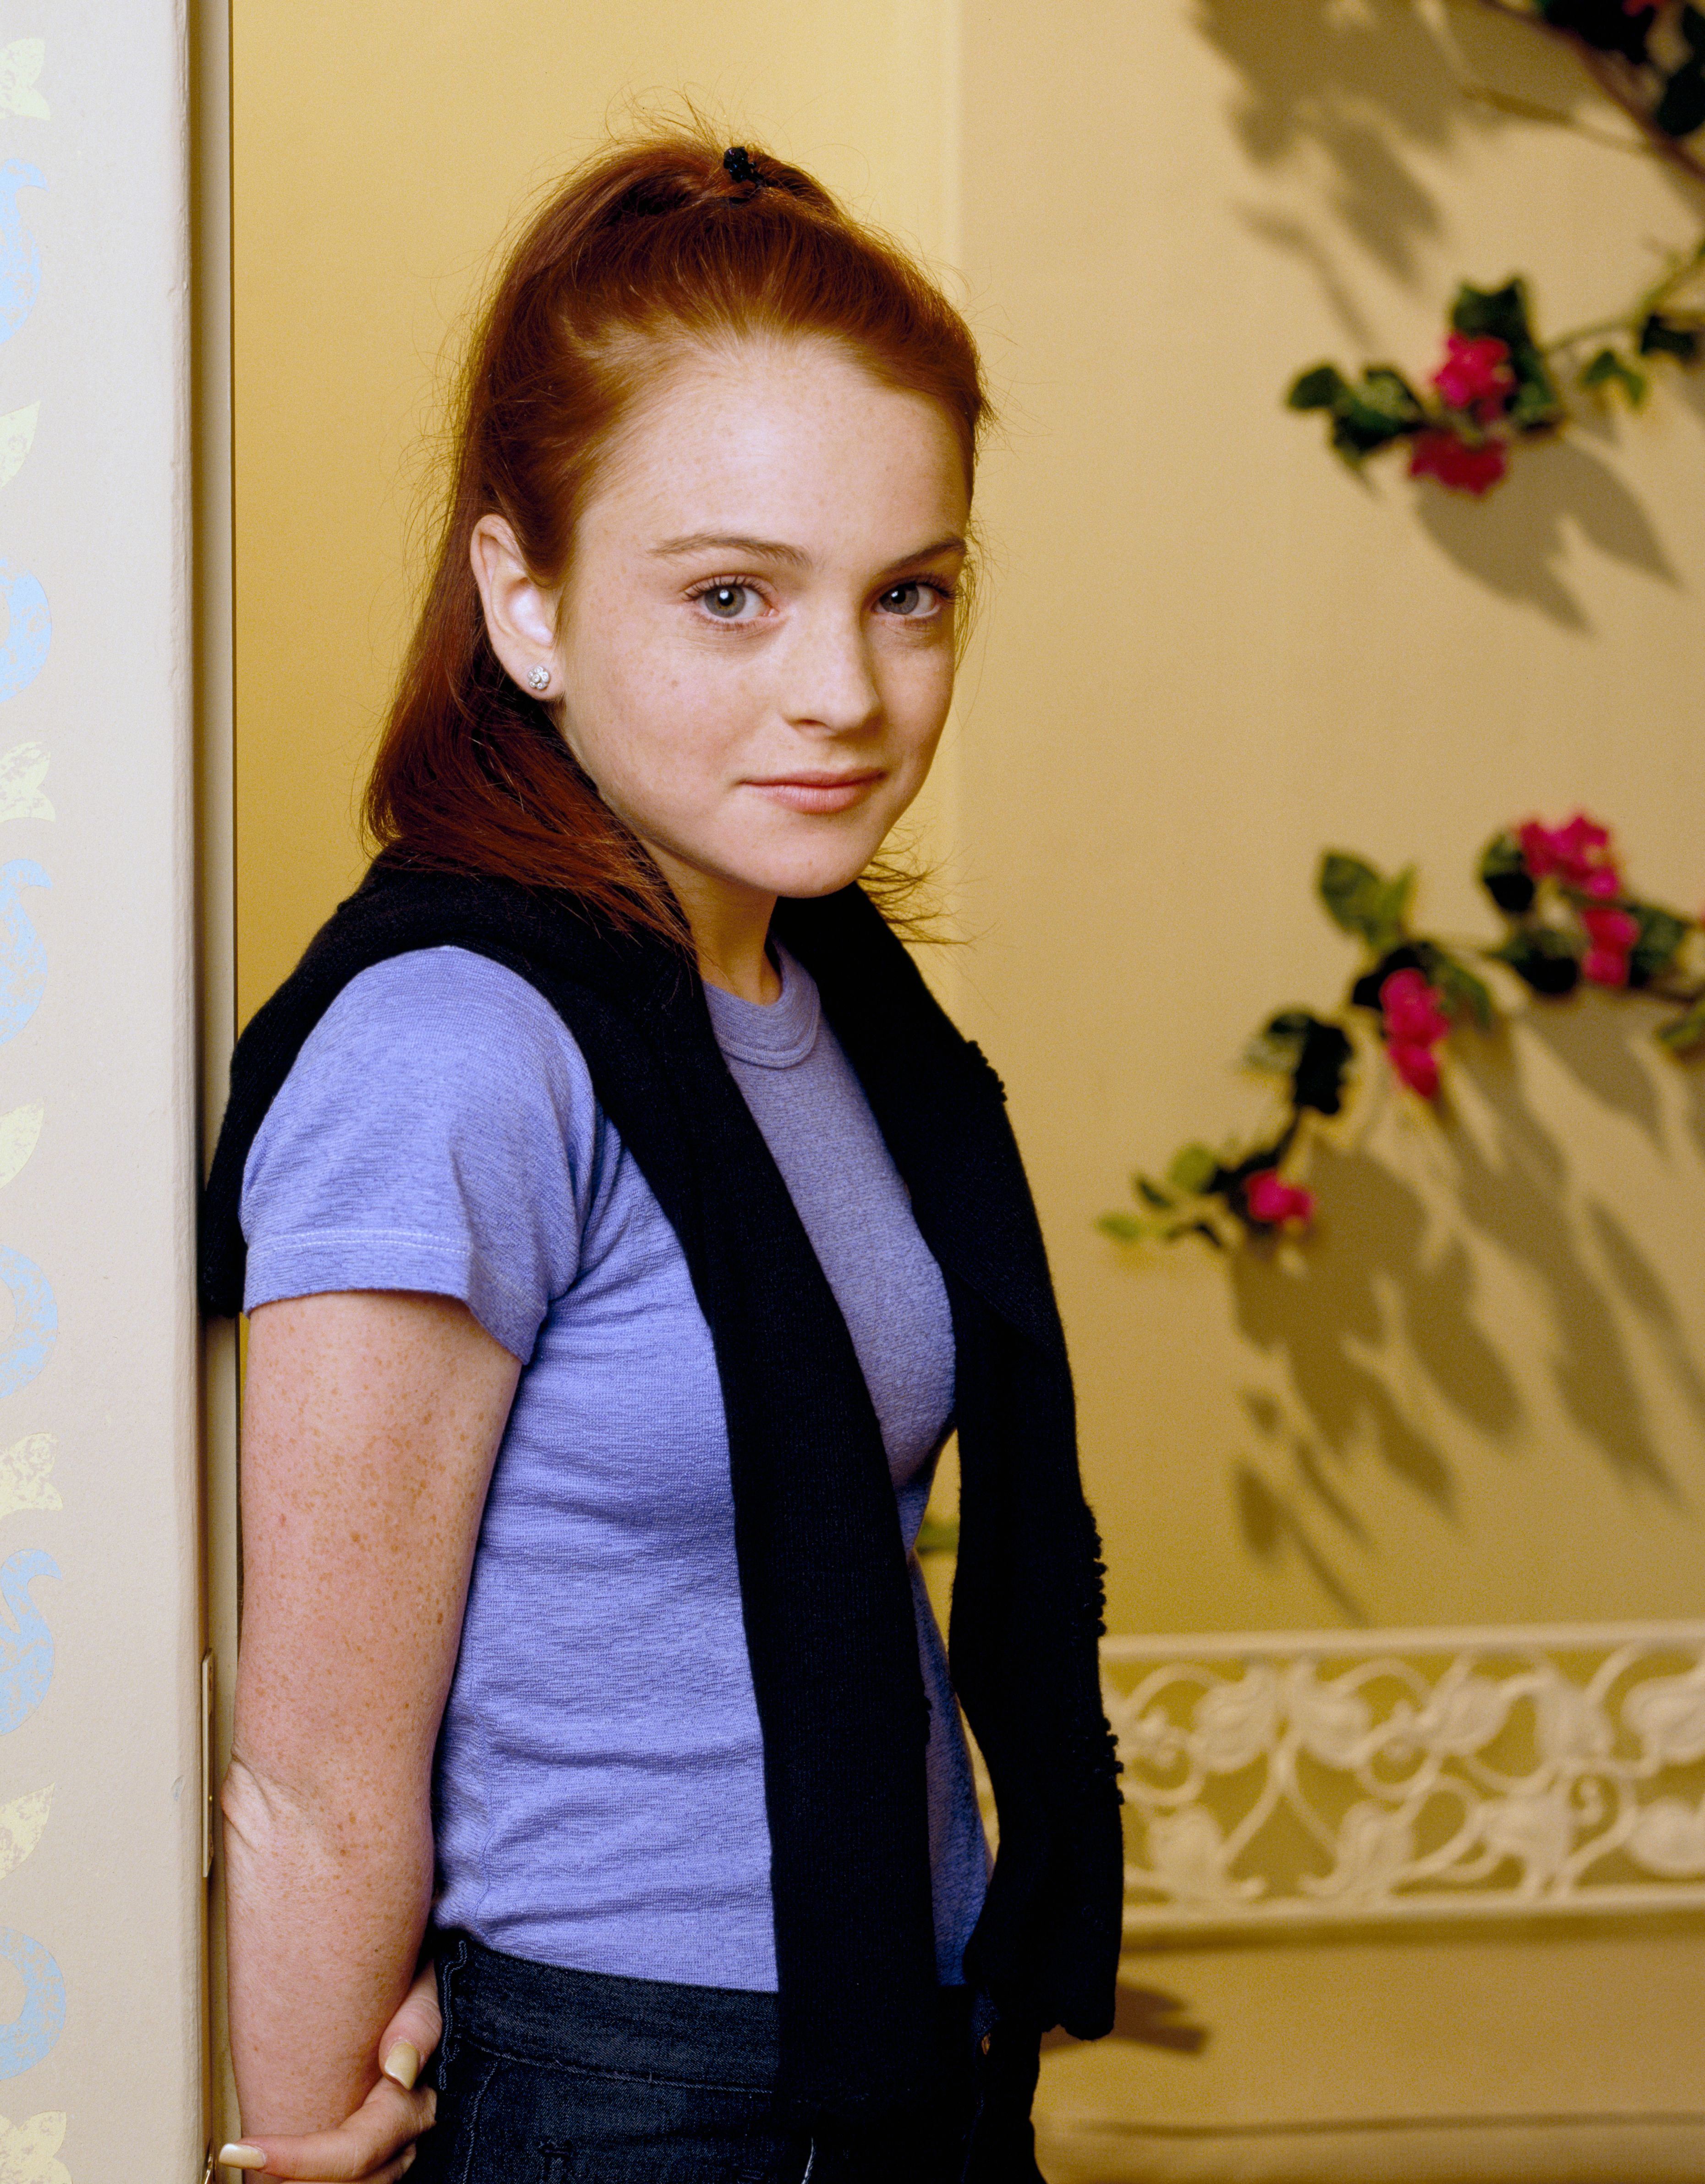 Lindsay Lohan as Rose for the sitcom "Bette," gallery session April 1, 2000. | Source: Getty Images